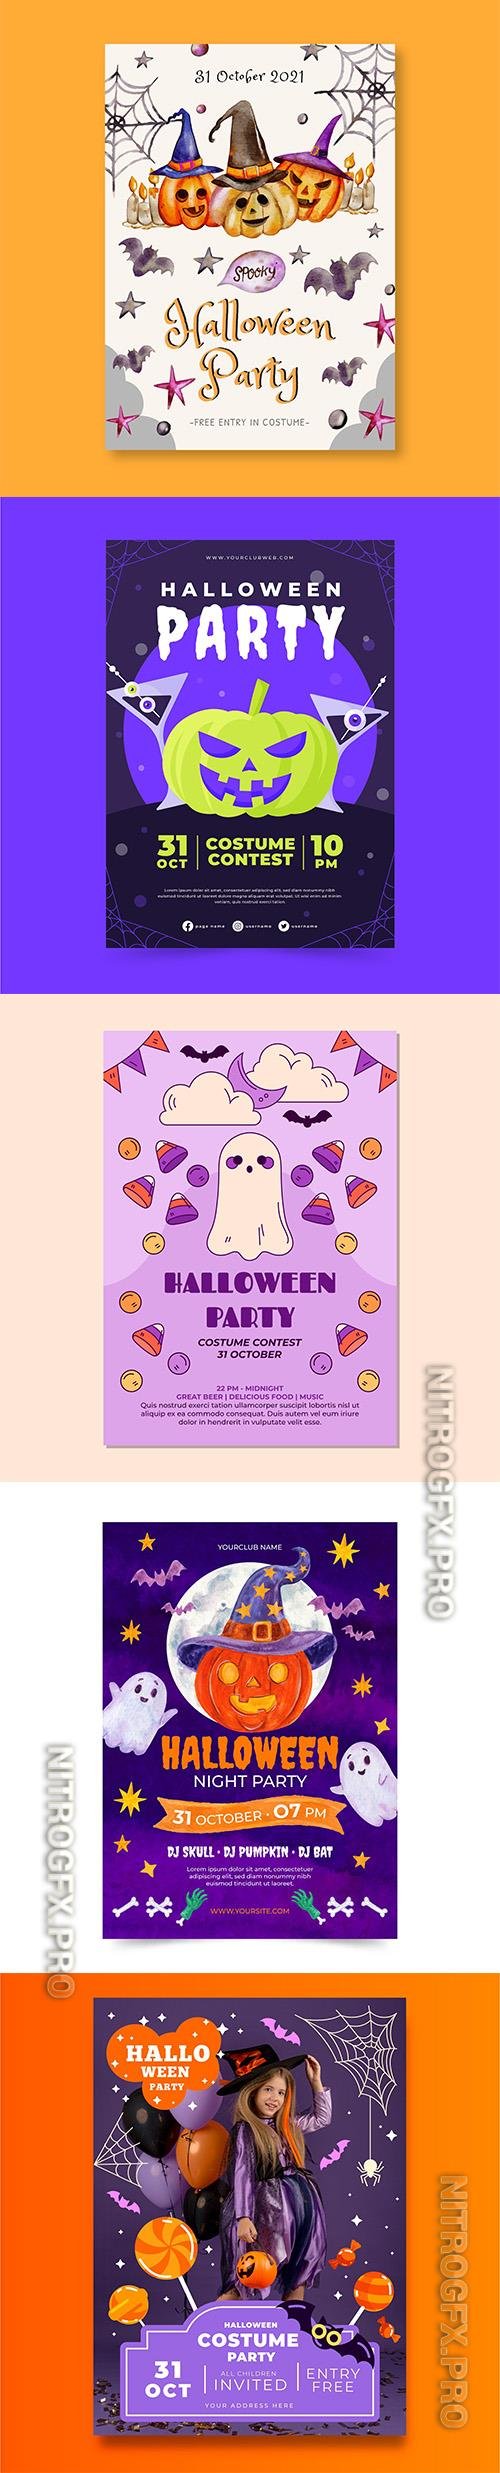 Realistic Halloween Party Vertical Flyer Template Vol 8